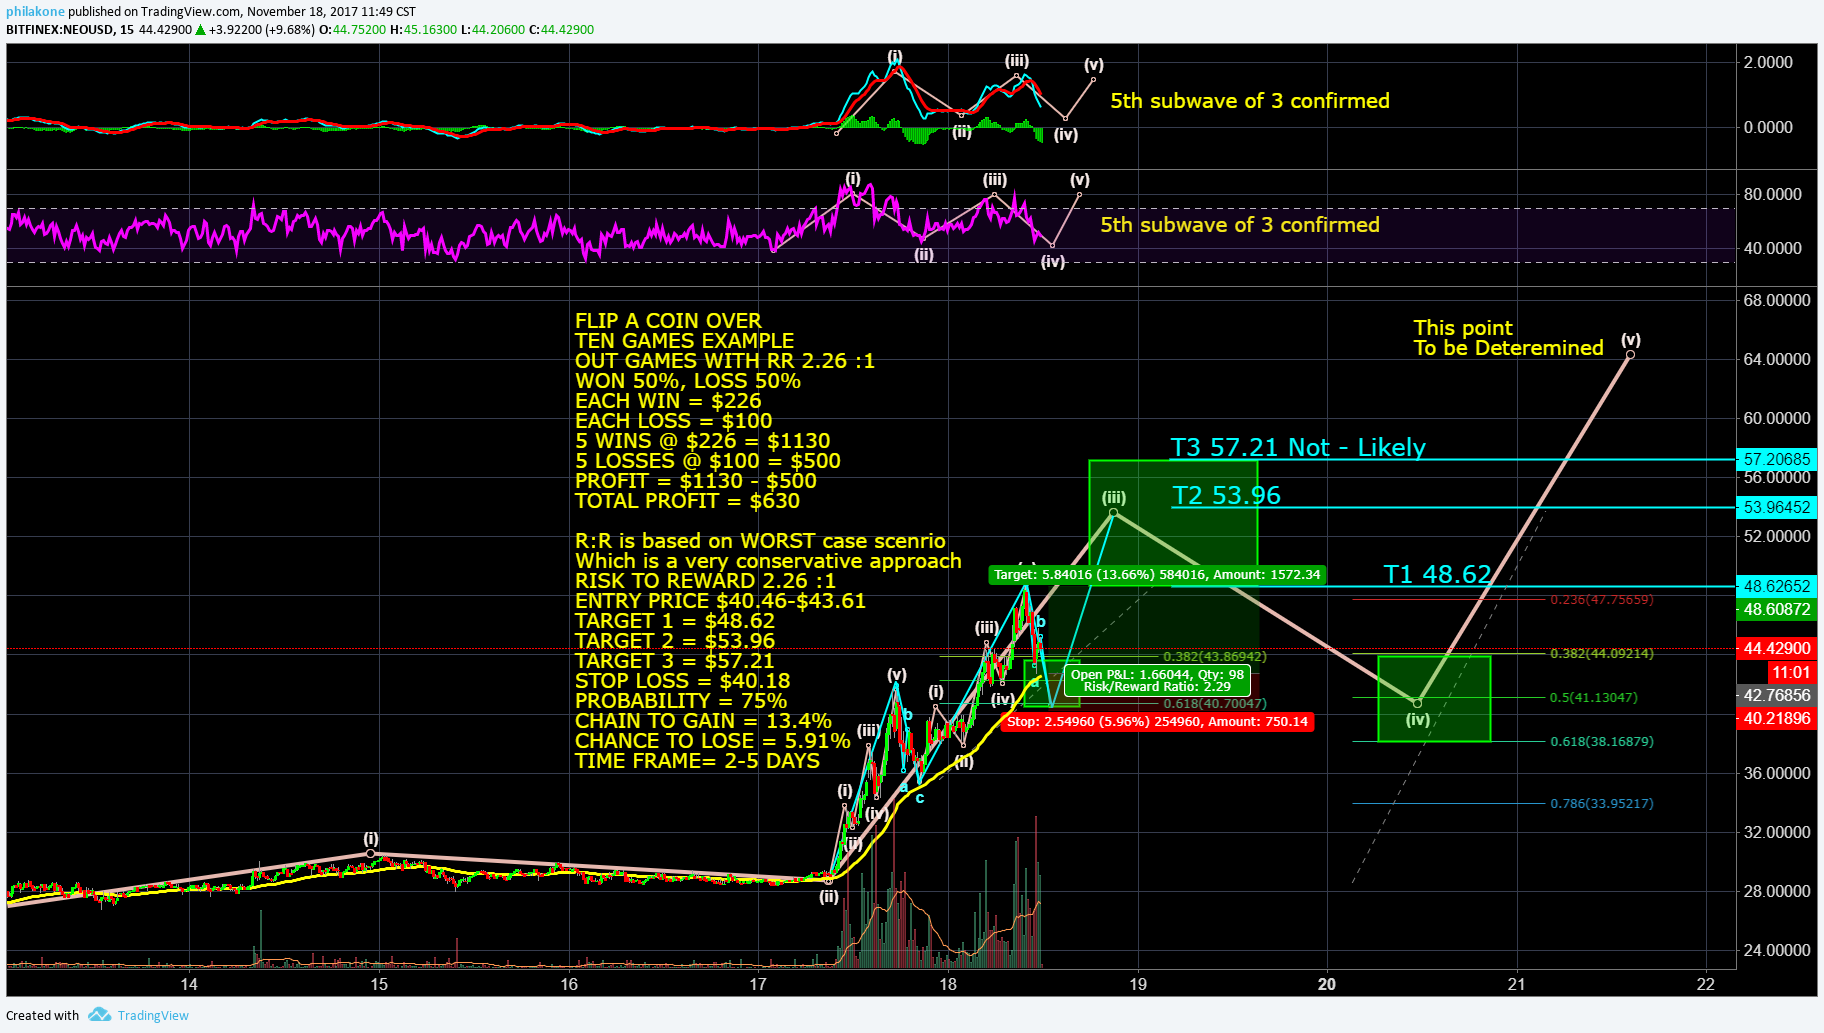 NEO   November 18   Technical Analysis   Long Entry   $40.46 to $43.61 T1 $48.62 T2 $53.96 T3 $57.21 (Not LIkely).png